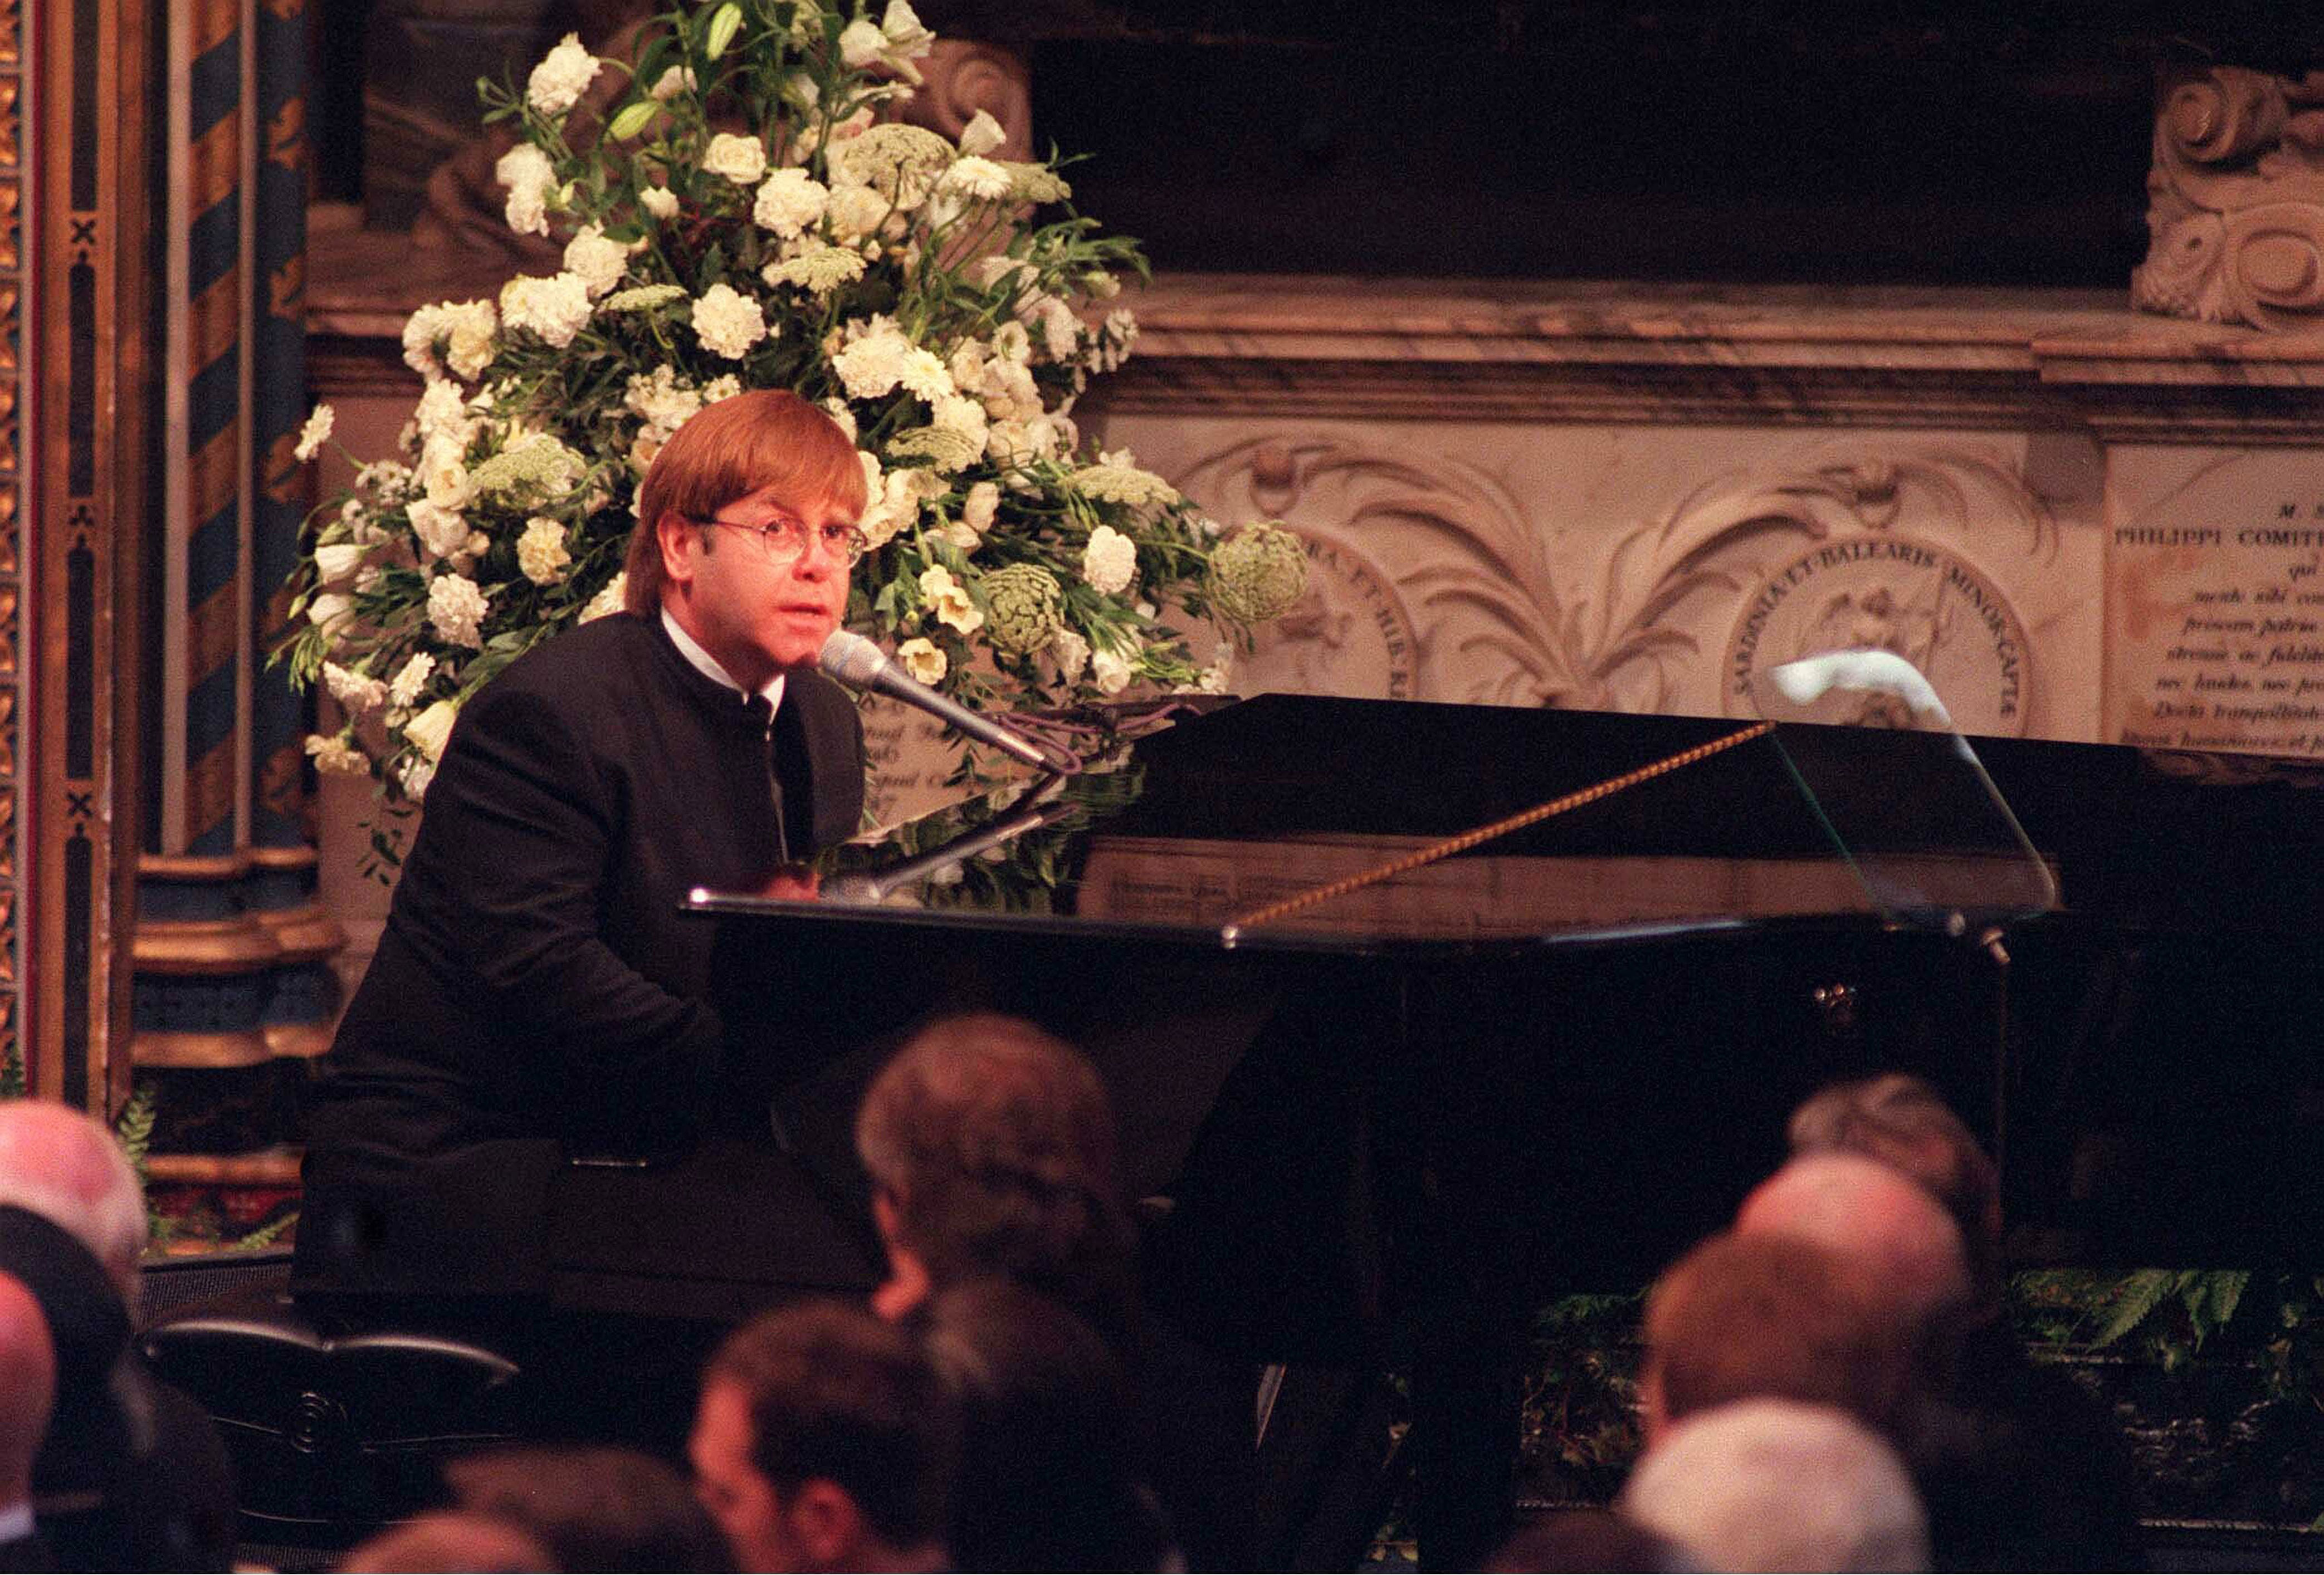 <p>Sir <a href="https://www.wonderwall.com/celebrity/profiles/overview/elton-john-977.article">Elton John</a> performed "Candle in the Wind" at the funeral of his close friend Princess Diana at Westminster Abbey in London on Sept. 6, 1997.</p>